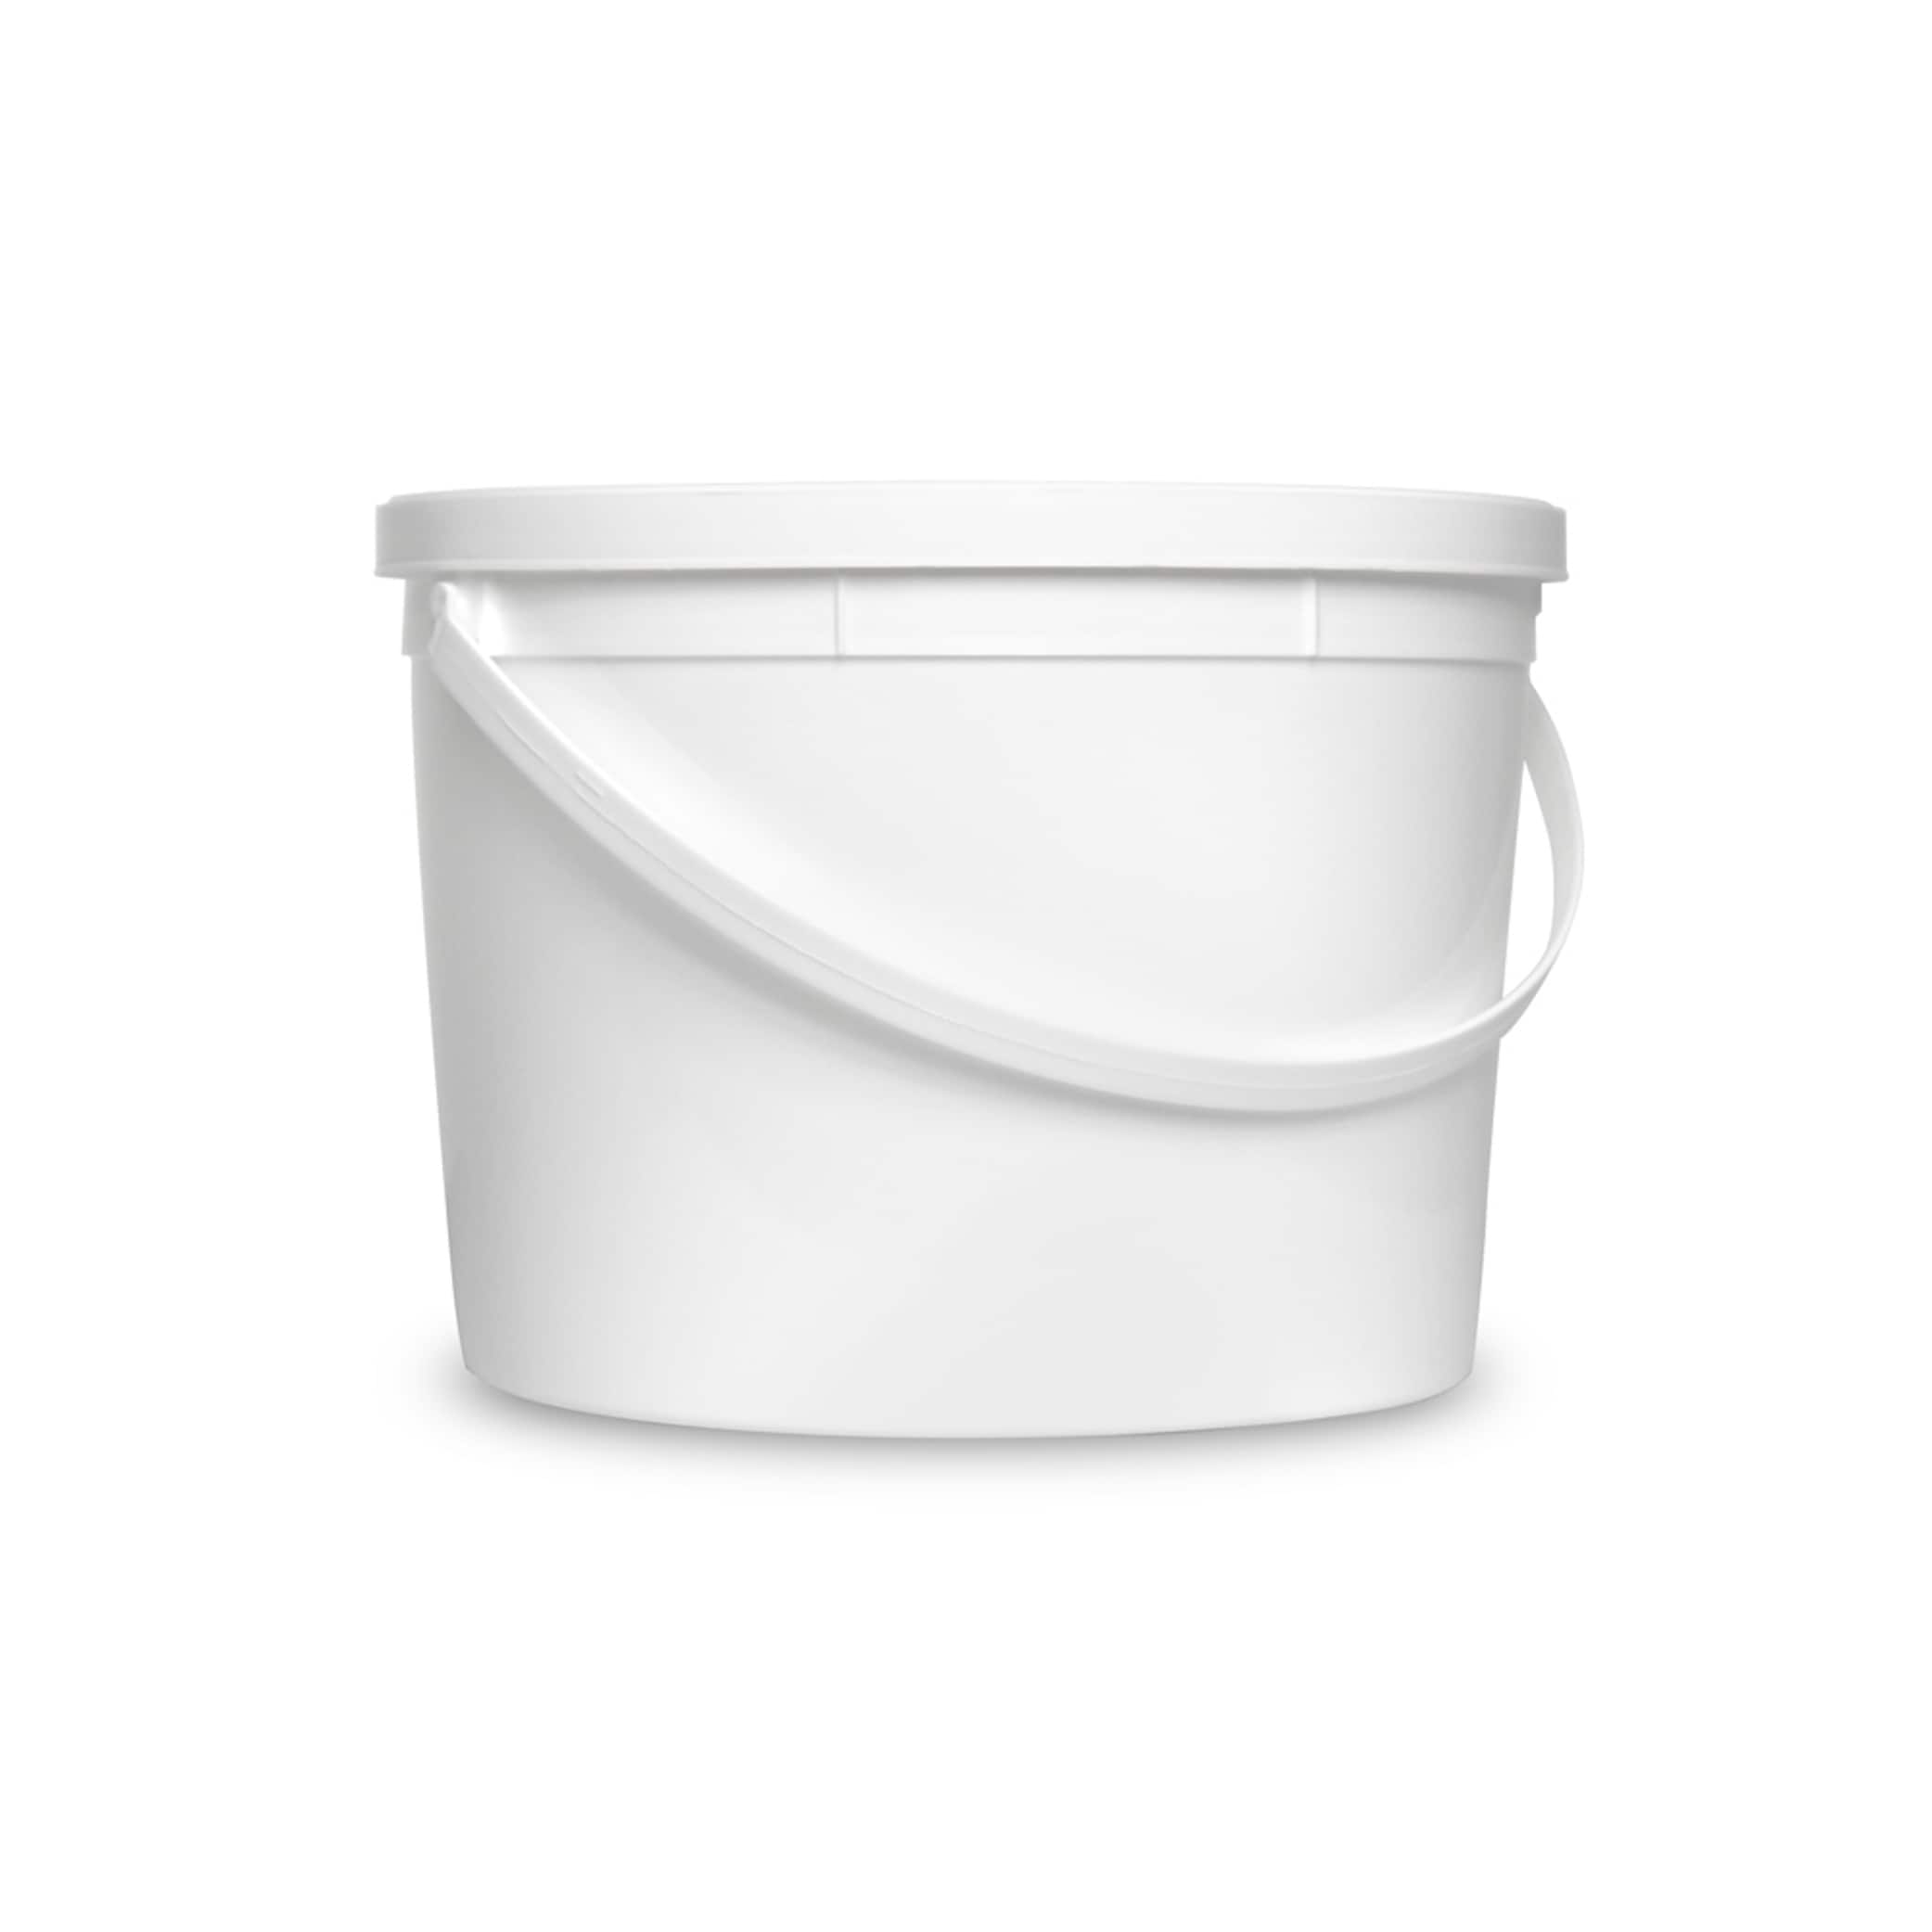 Price Containers Food Grade Plastic Bucket With Handle 820122